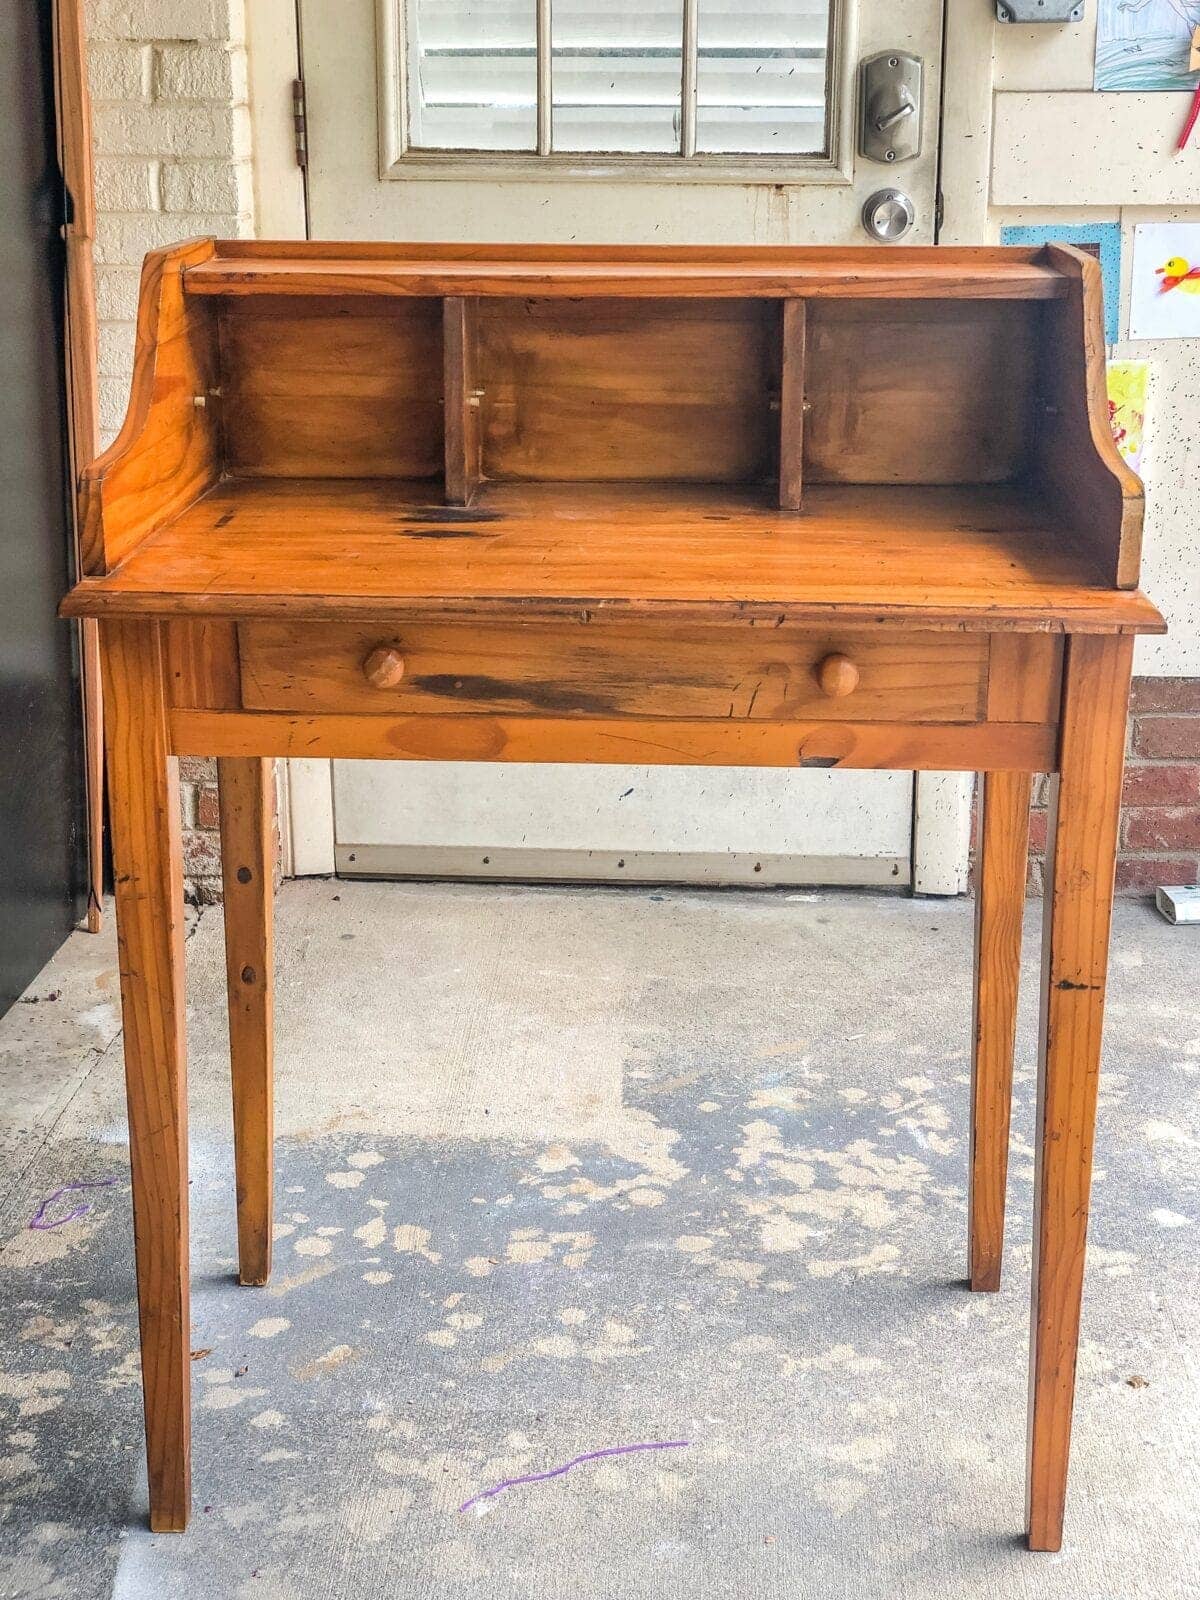 writing desk found while thrift shopping